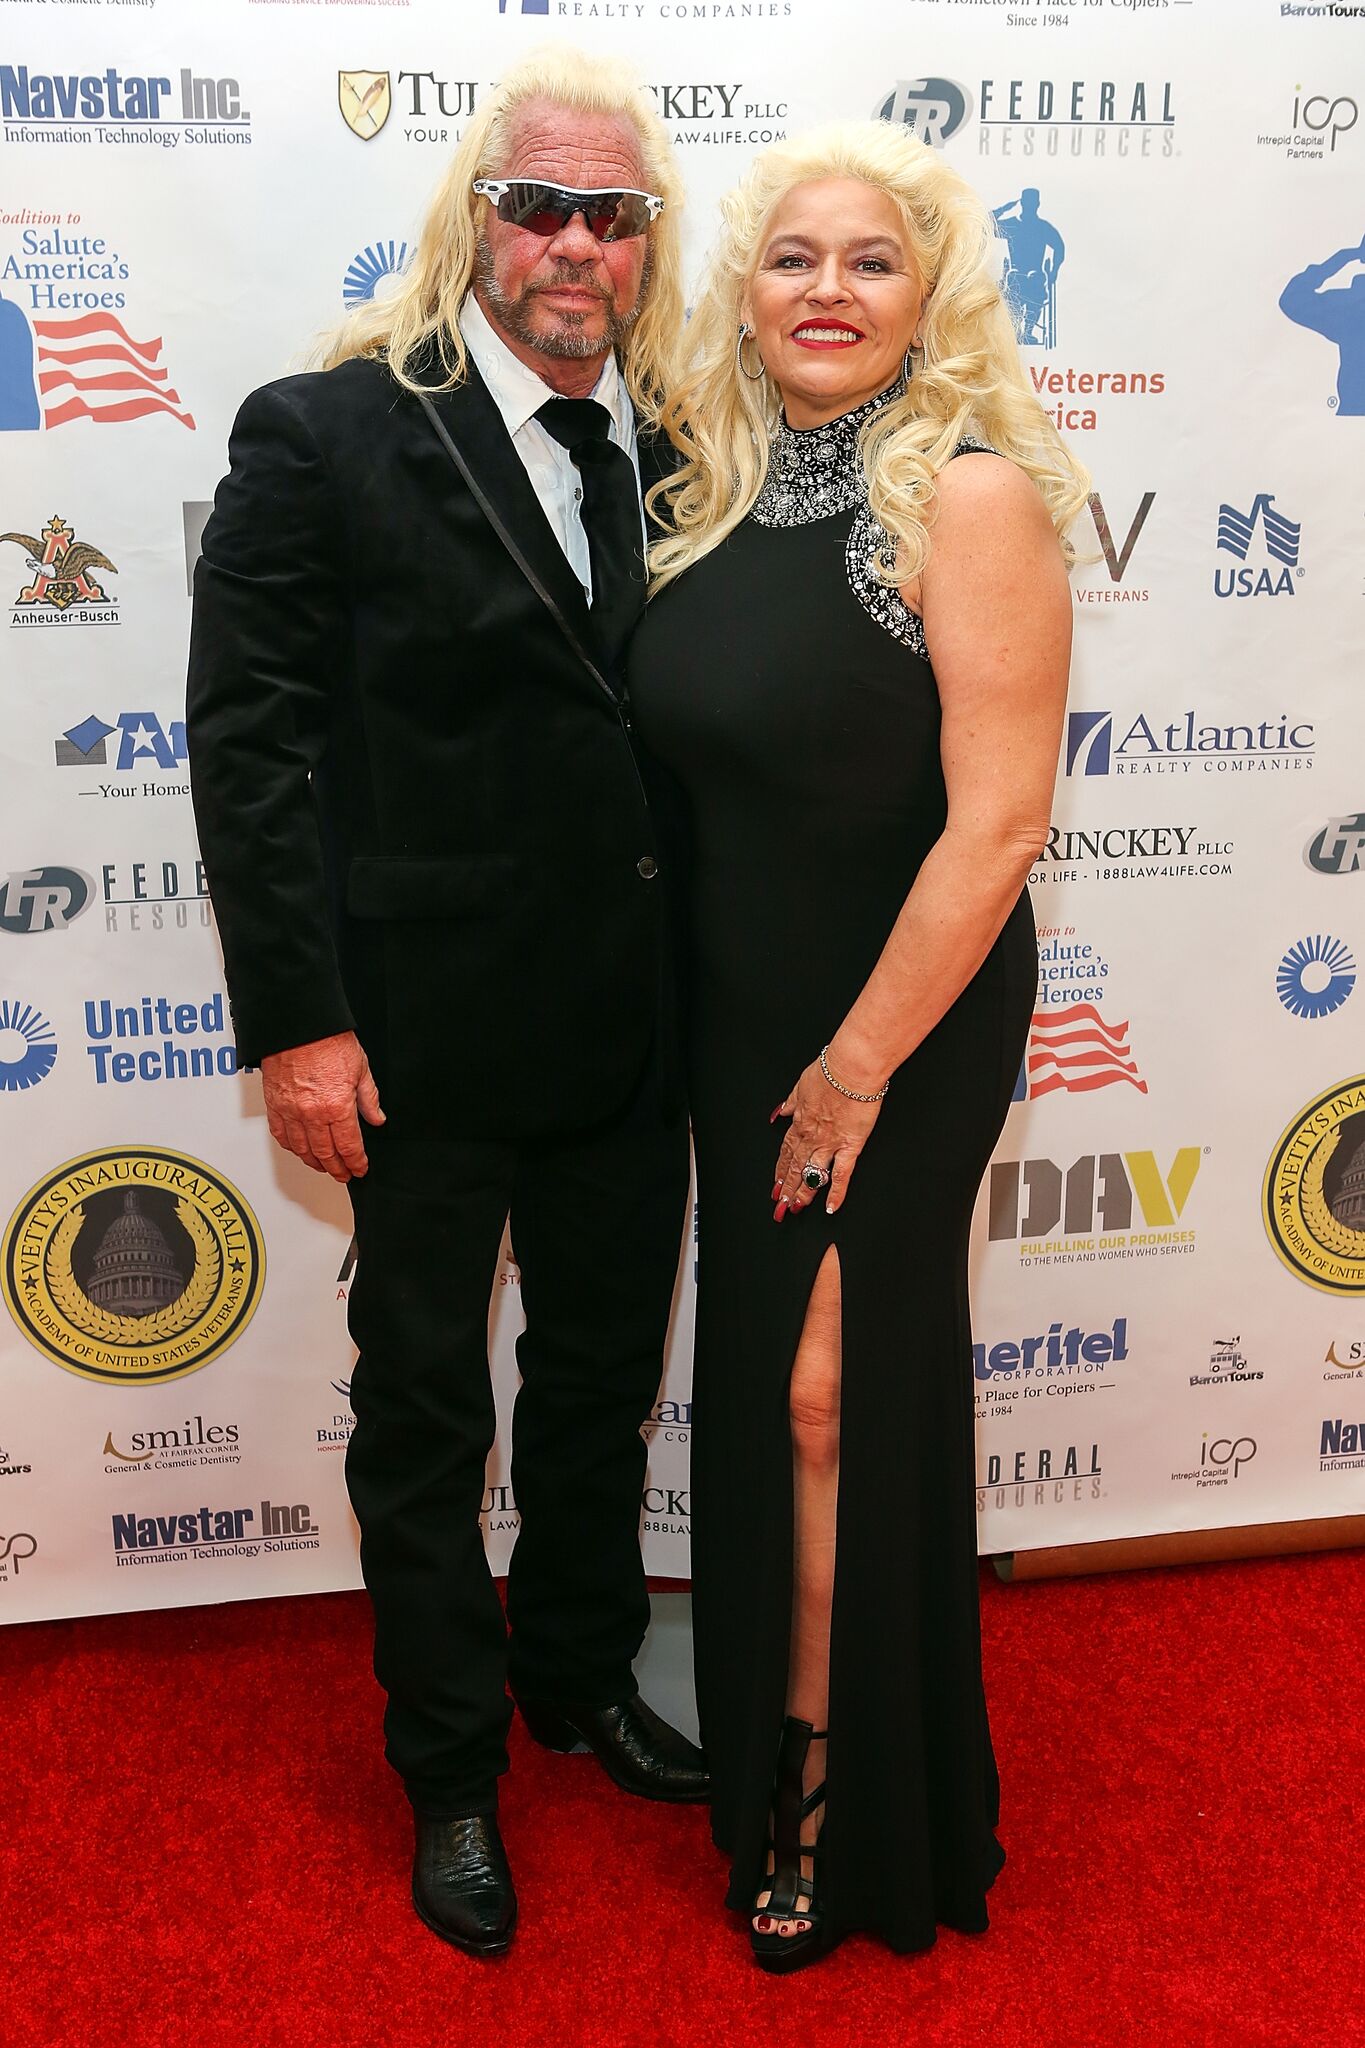 Duane 'Dog the Bounty Hunter" Chapman and Beth Chapman attend the Vettys Presidential Inaugural Ball | Getty Images 